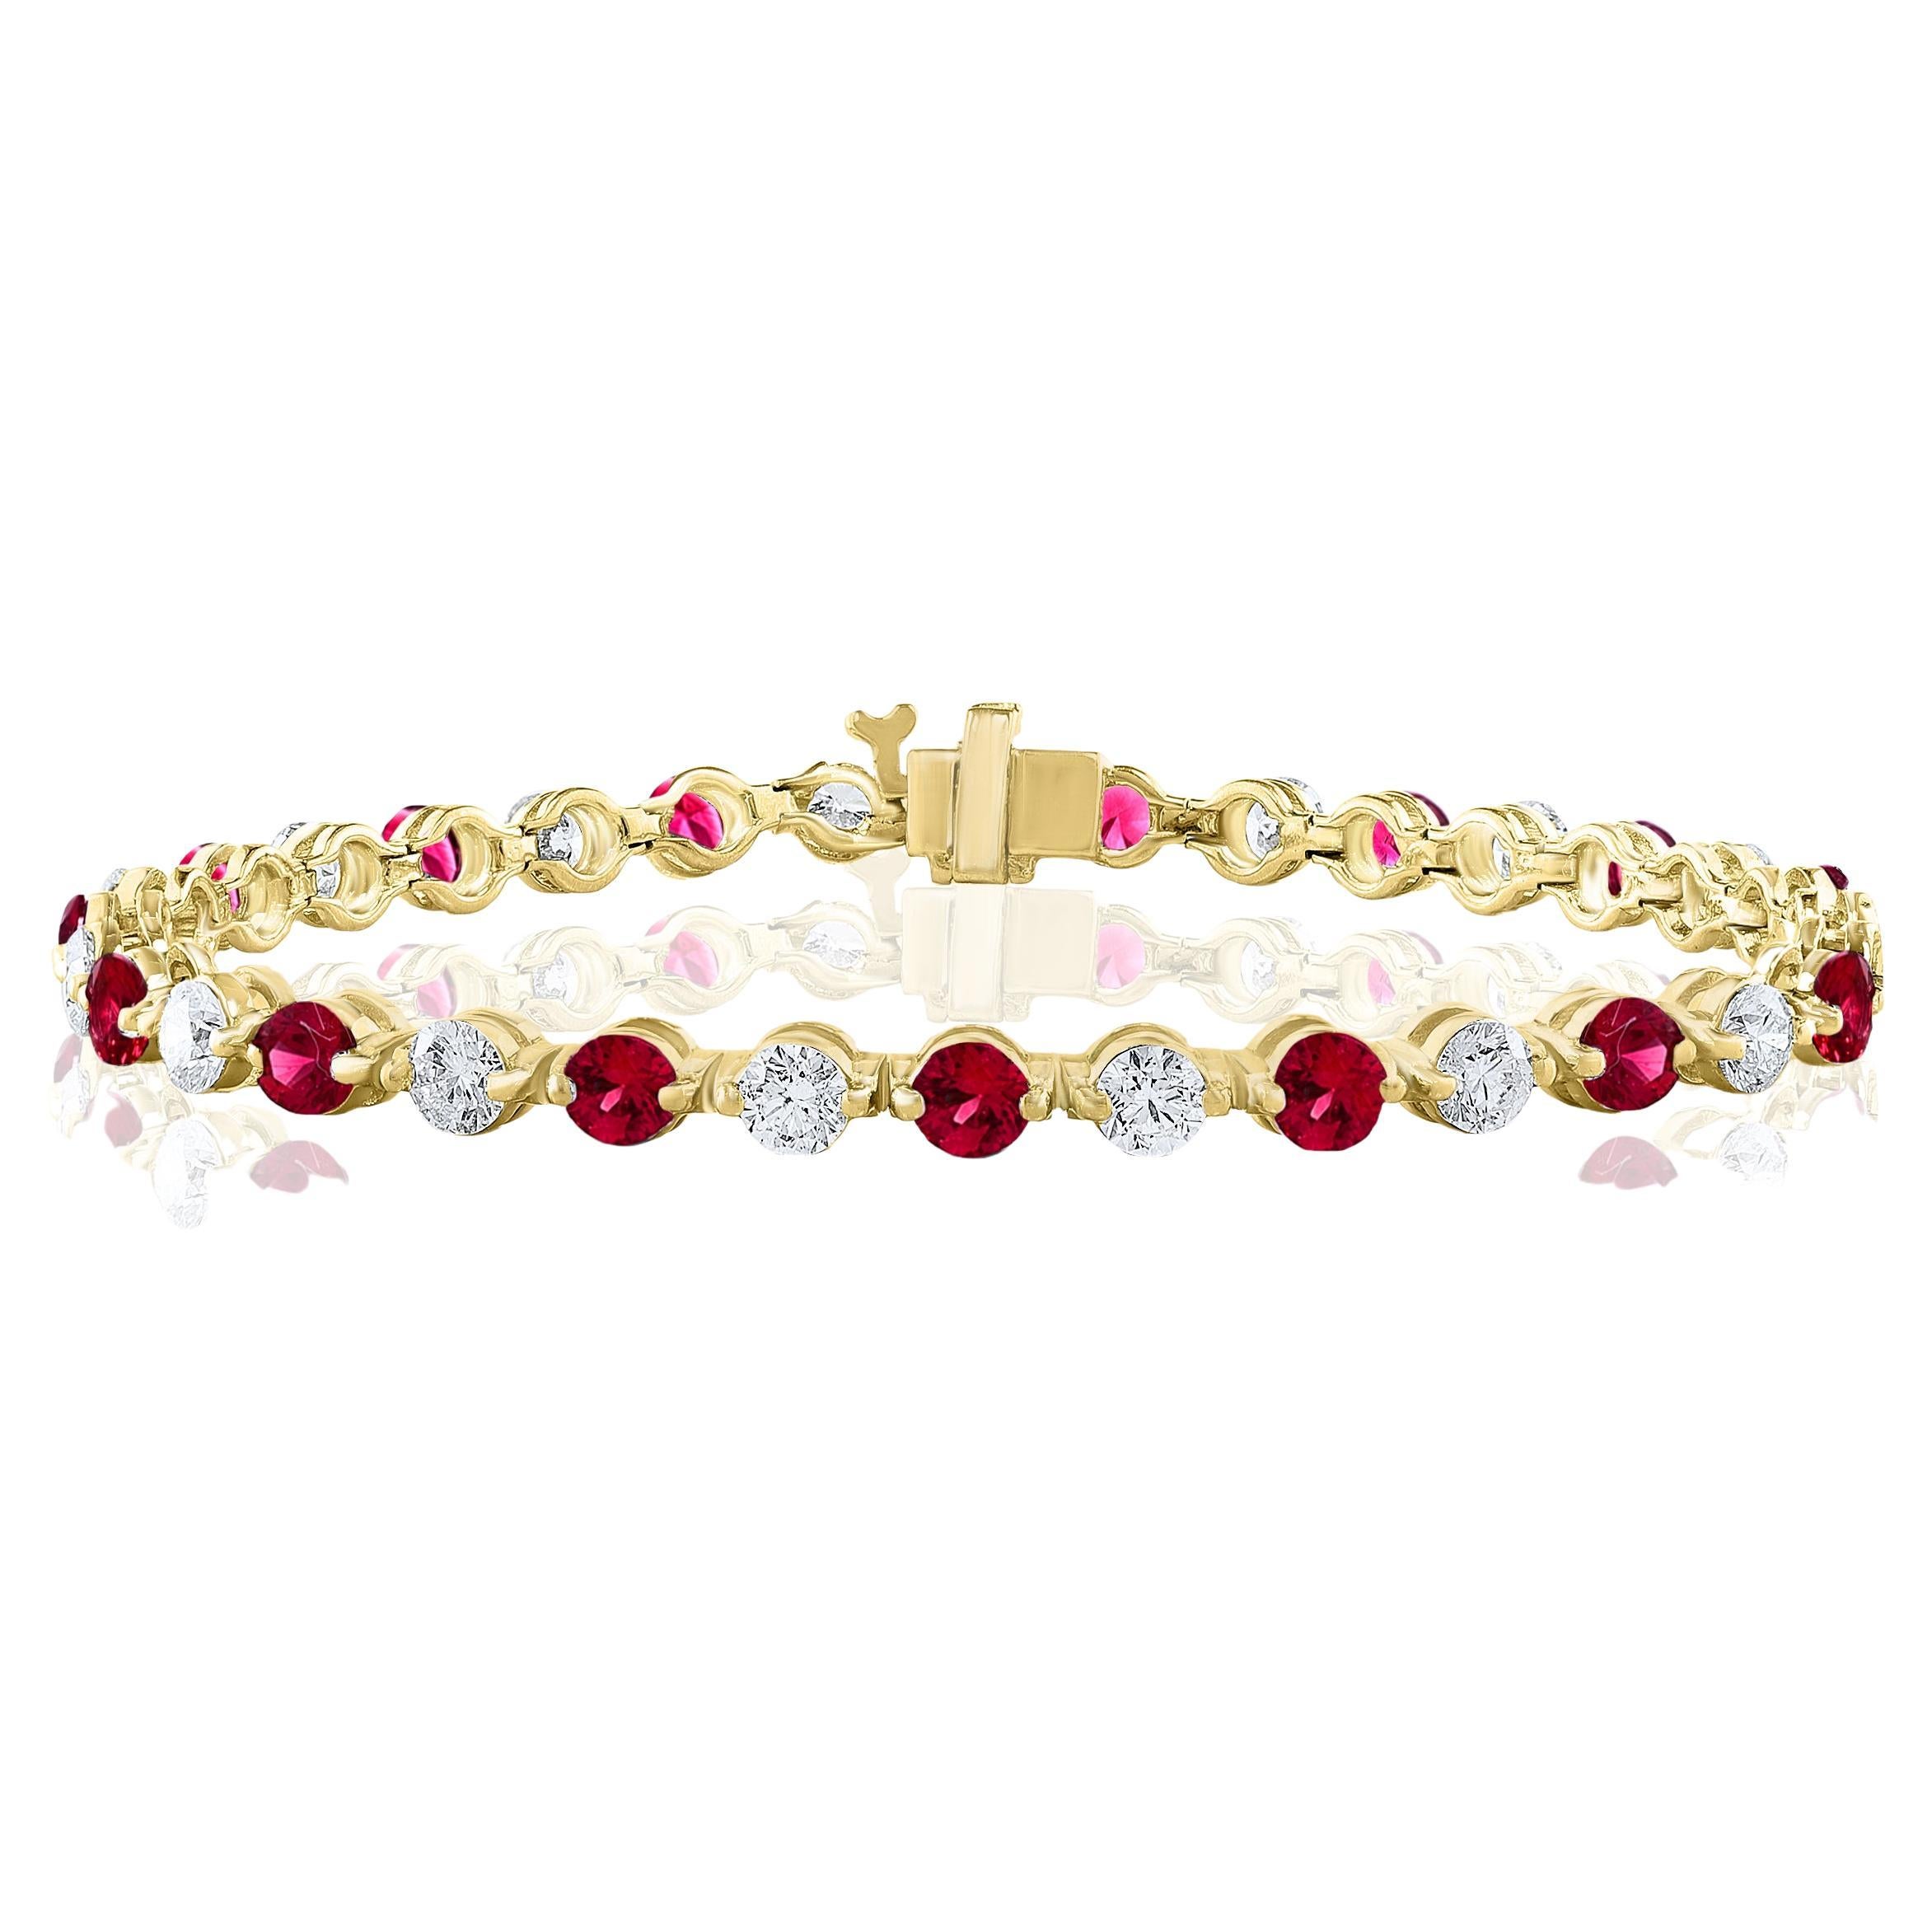 3.10 Carat Round Ruby and Diamond Bracelet in 14K Yellow Gold